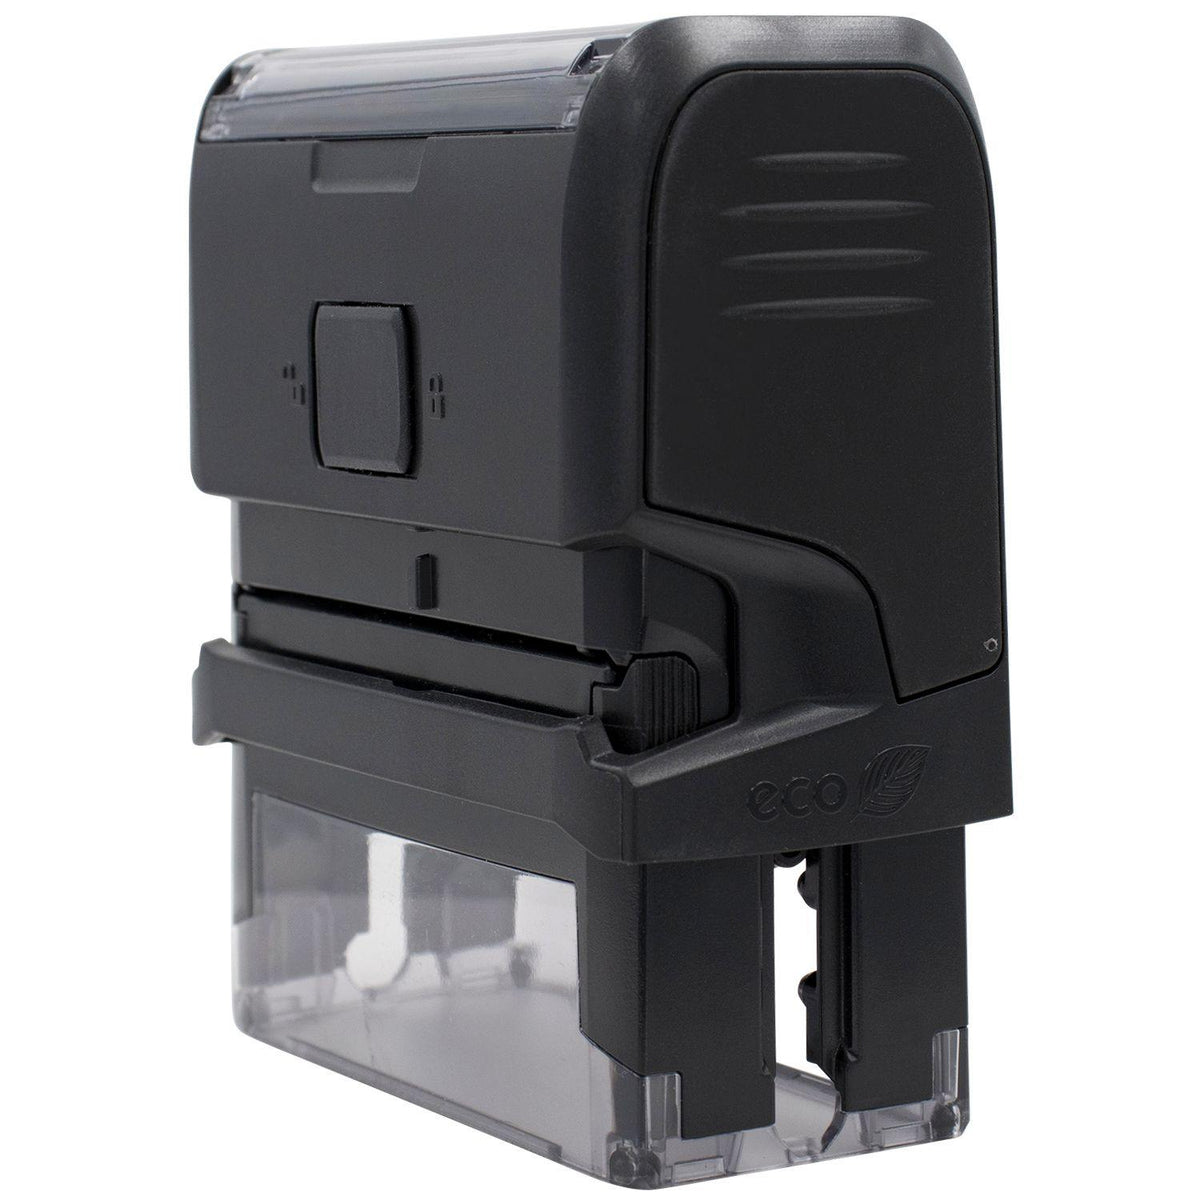 Self Inking Completed Stamp - Engineer Seal Stamps - Brand_Trodat, Impression Size_Small, Stamp Type_Self-Inking Stamp, Type of Use_Office